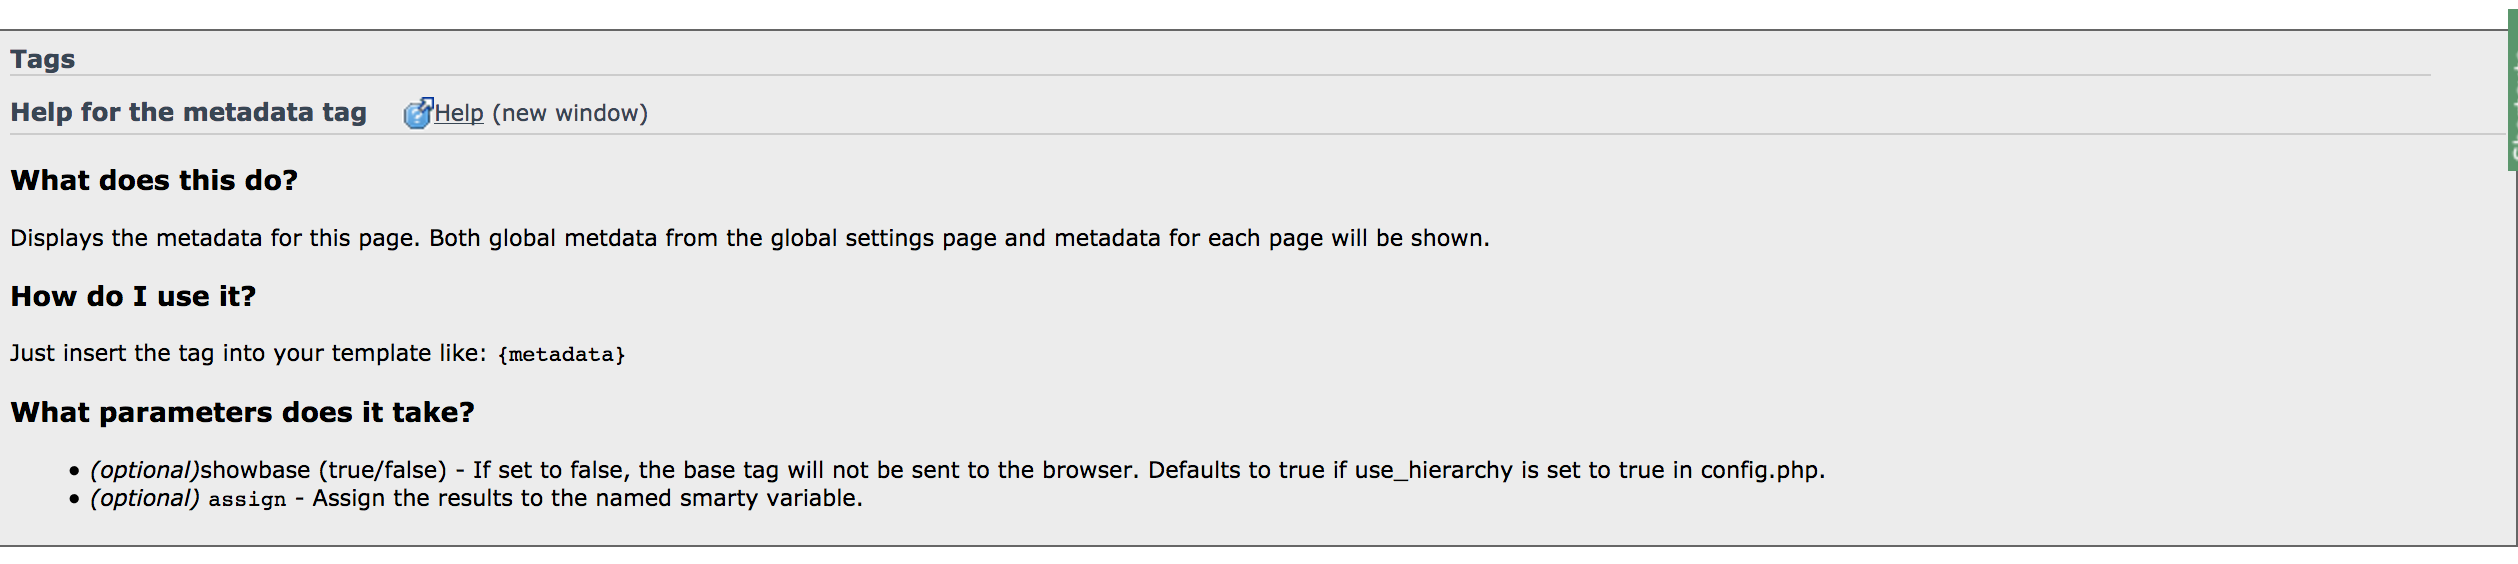 Documentation about the metadata tag